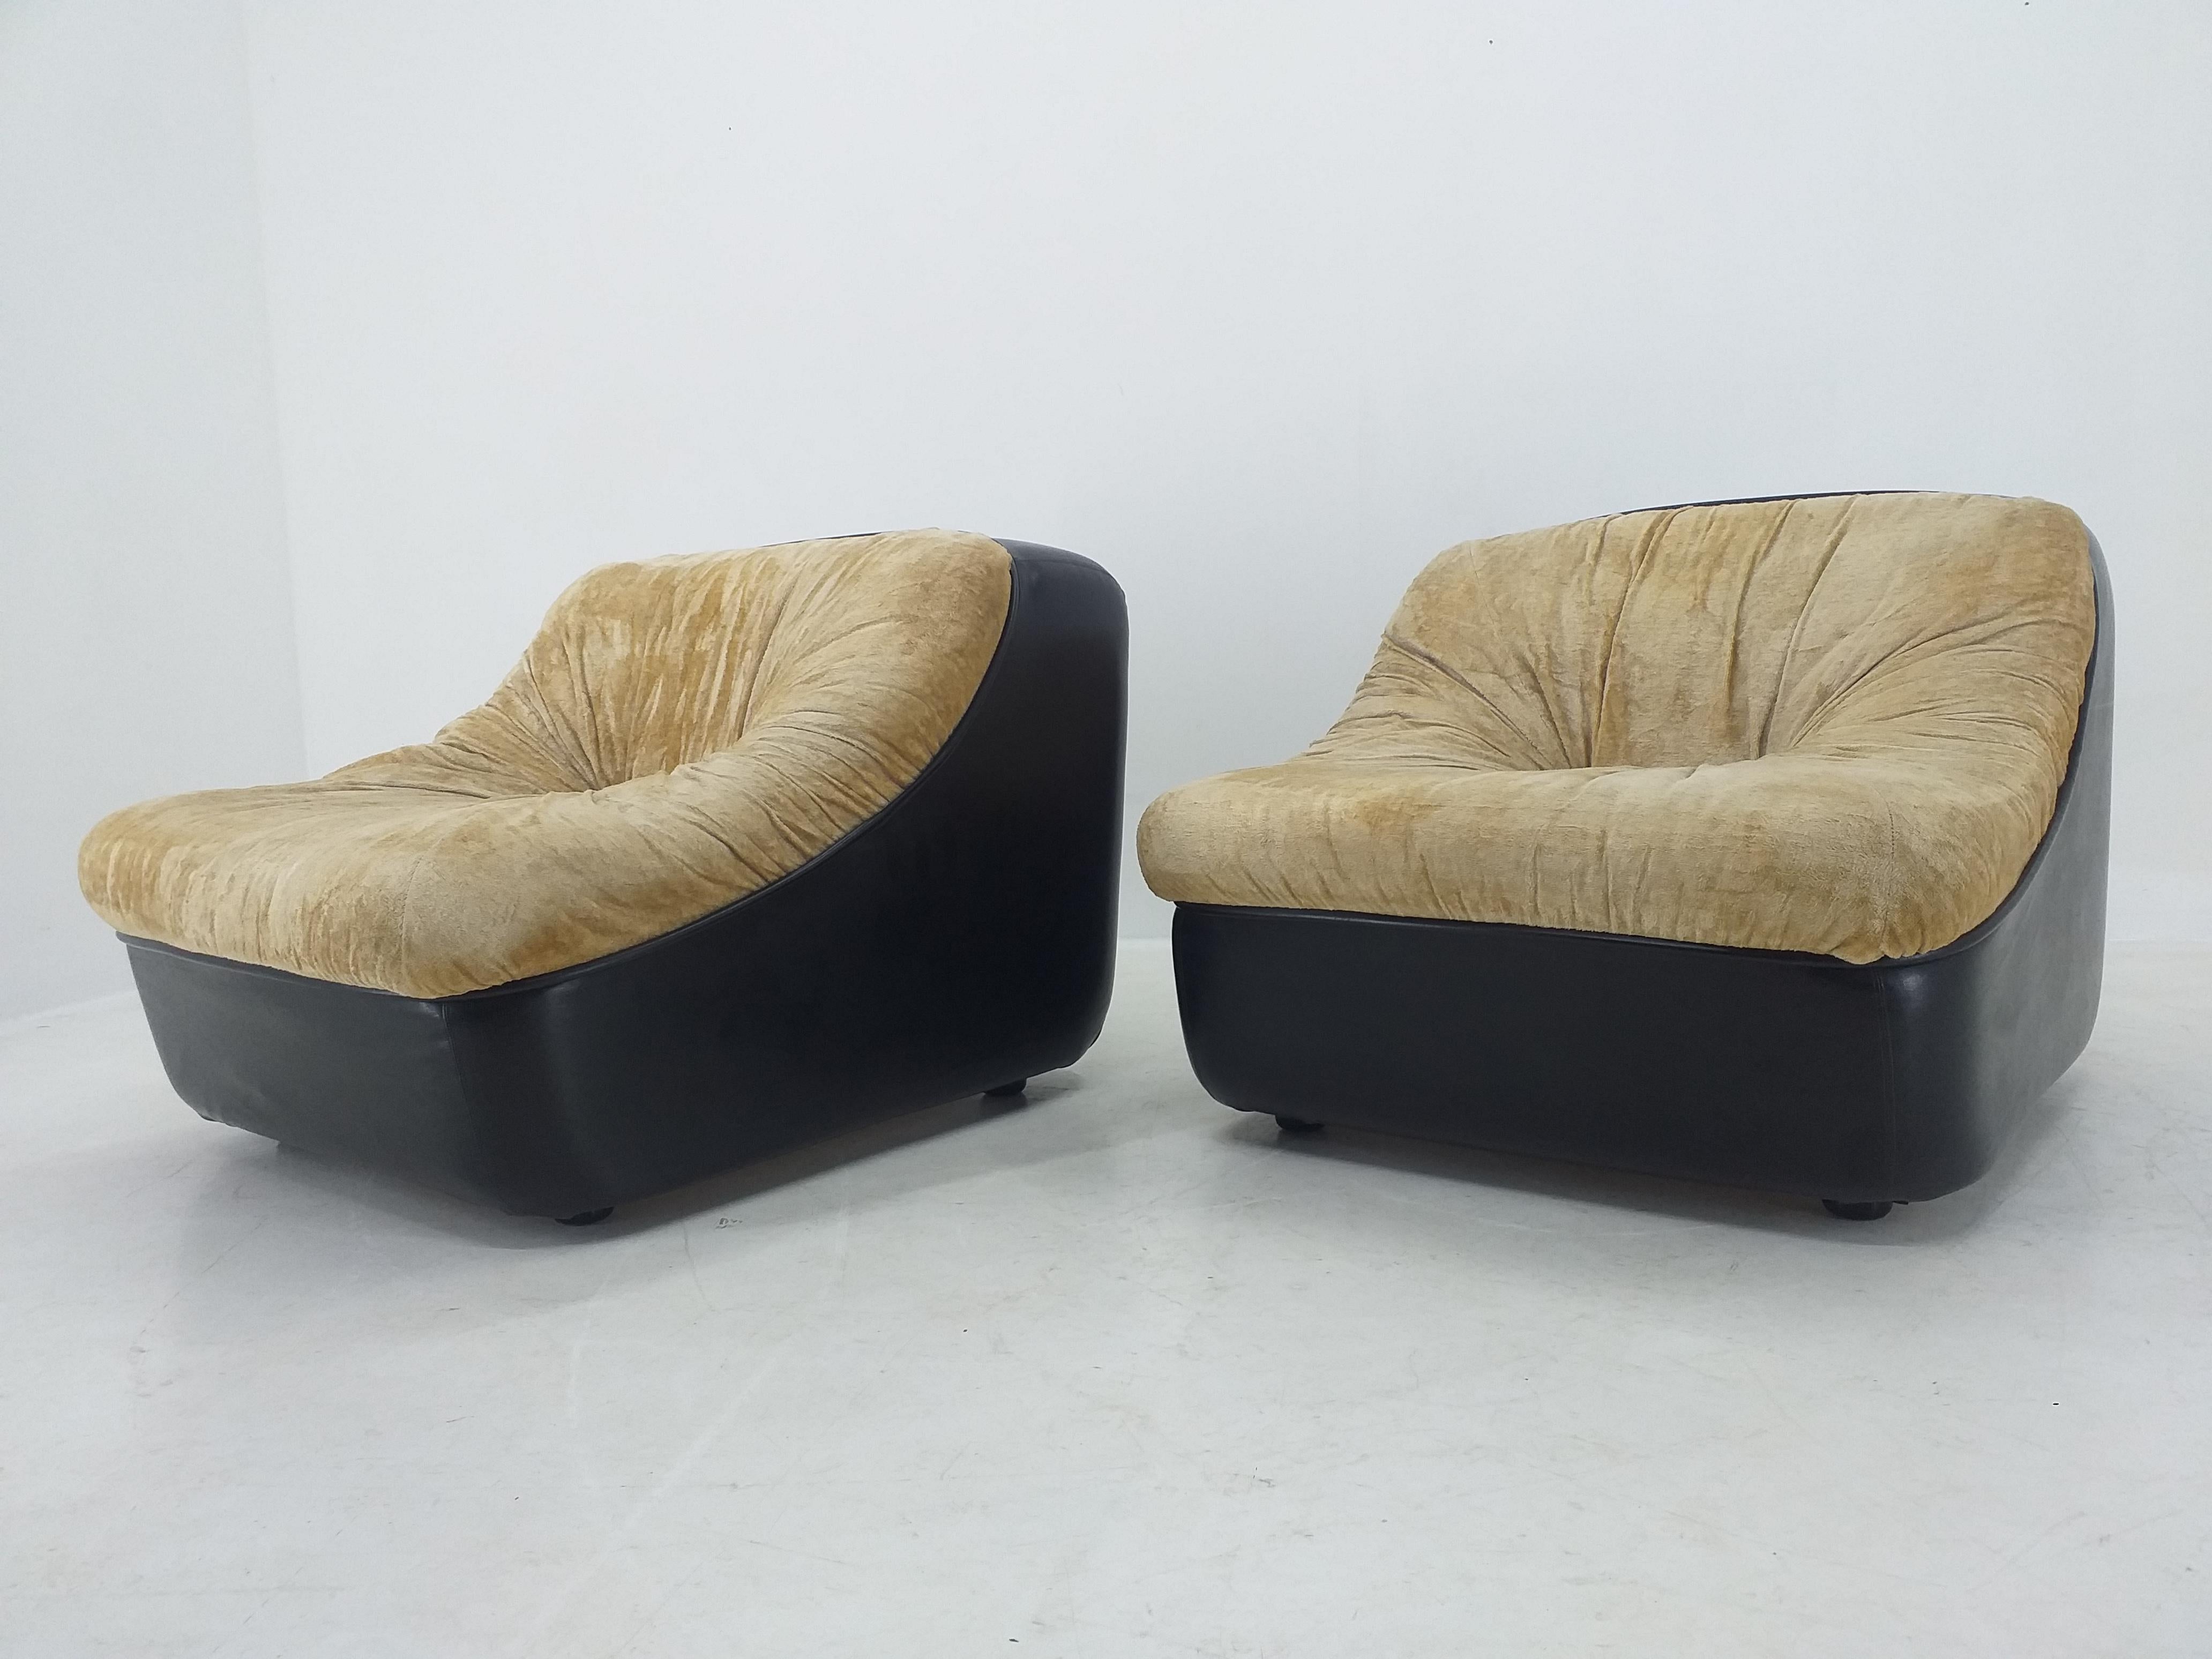 Pair of Midcentury Lounge Chairs, Italy, 1970s For Sale 4